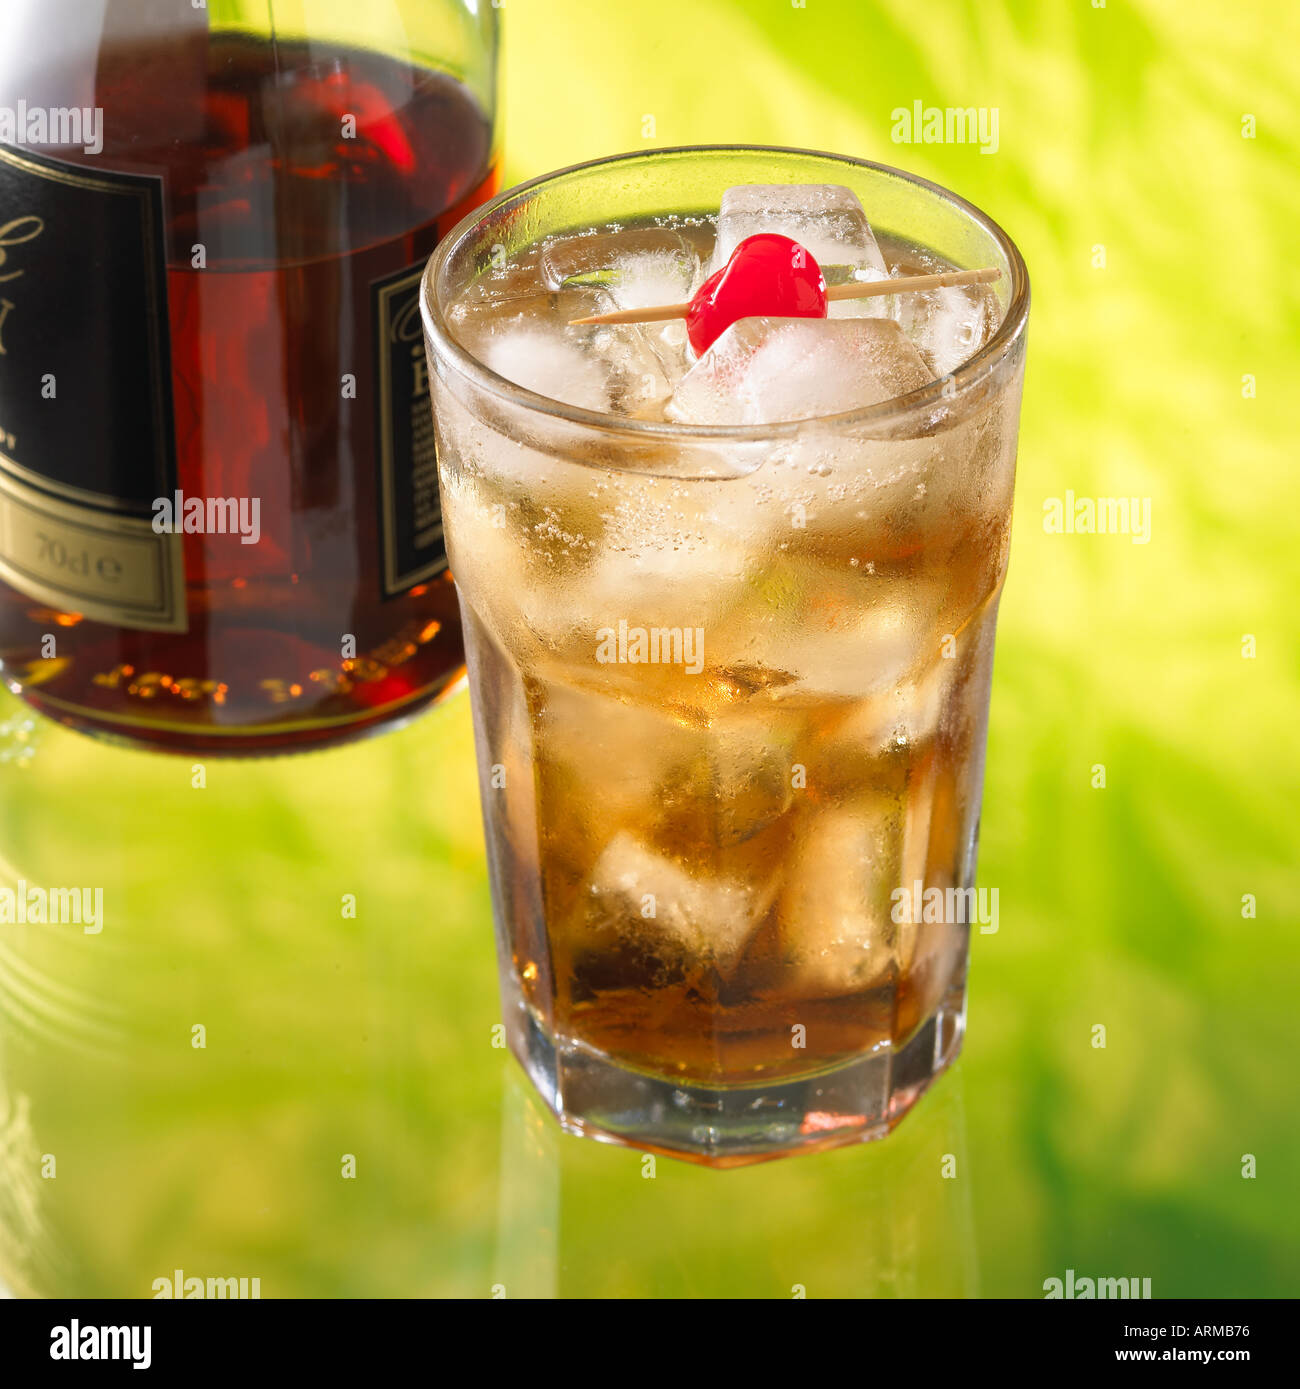 Cocktail Samba Scotch whisky Golden Rum Red Vermouth apricot brandy ice  cherry Keywords drink alcohol cocktails Stock Photo - Alamy